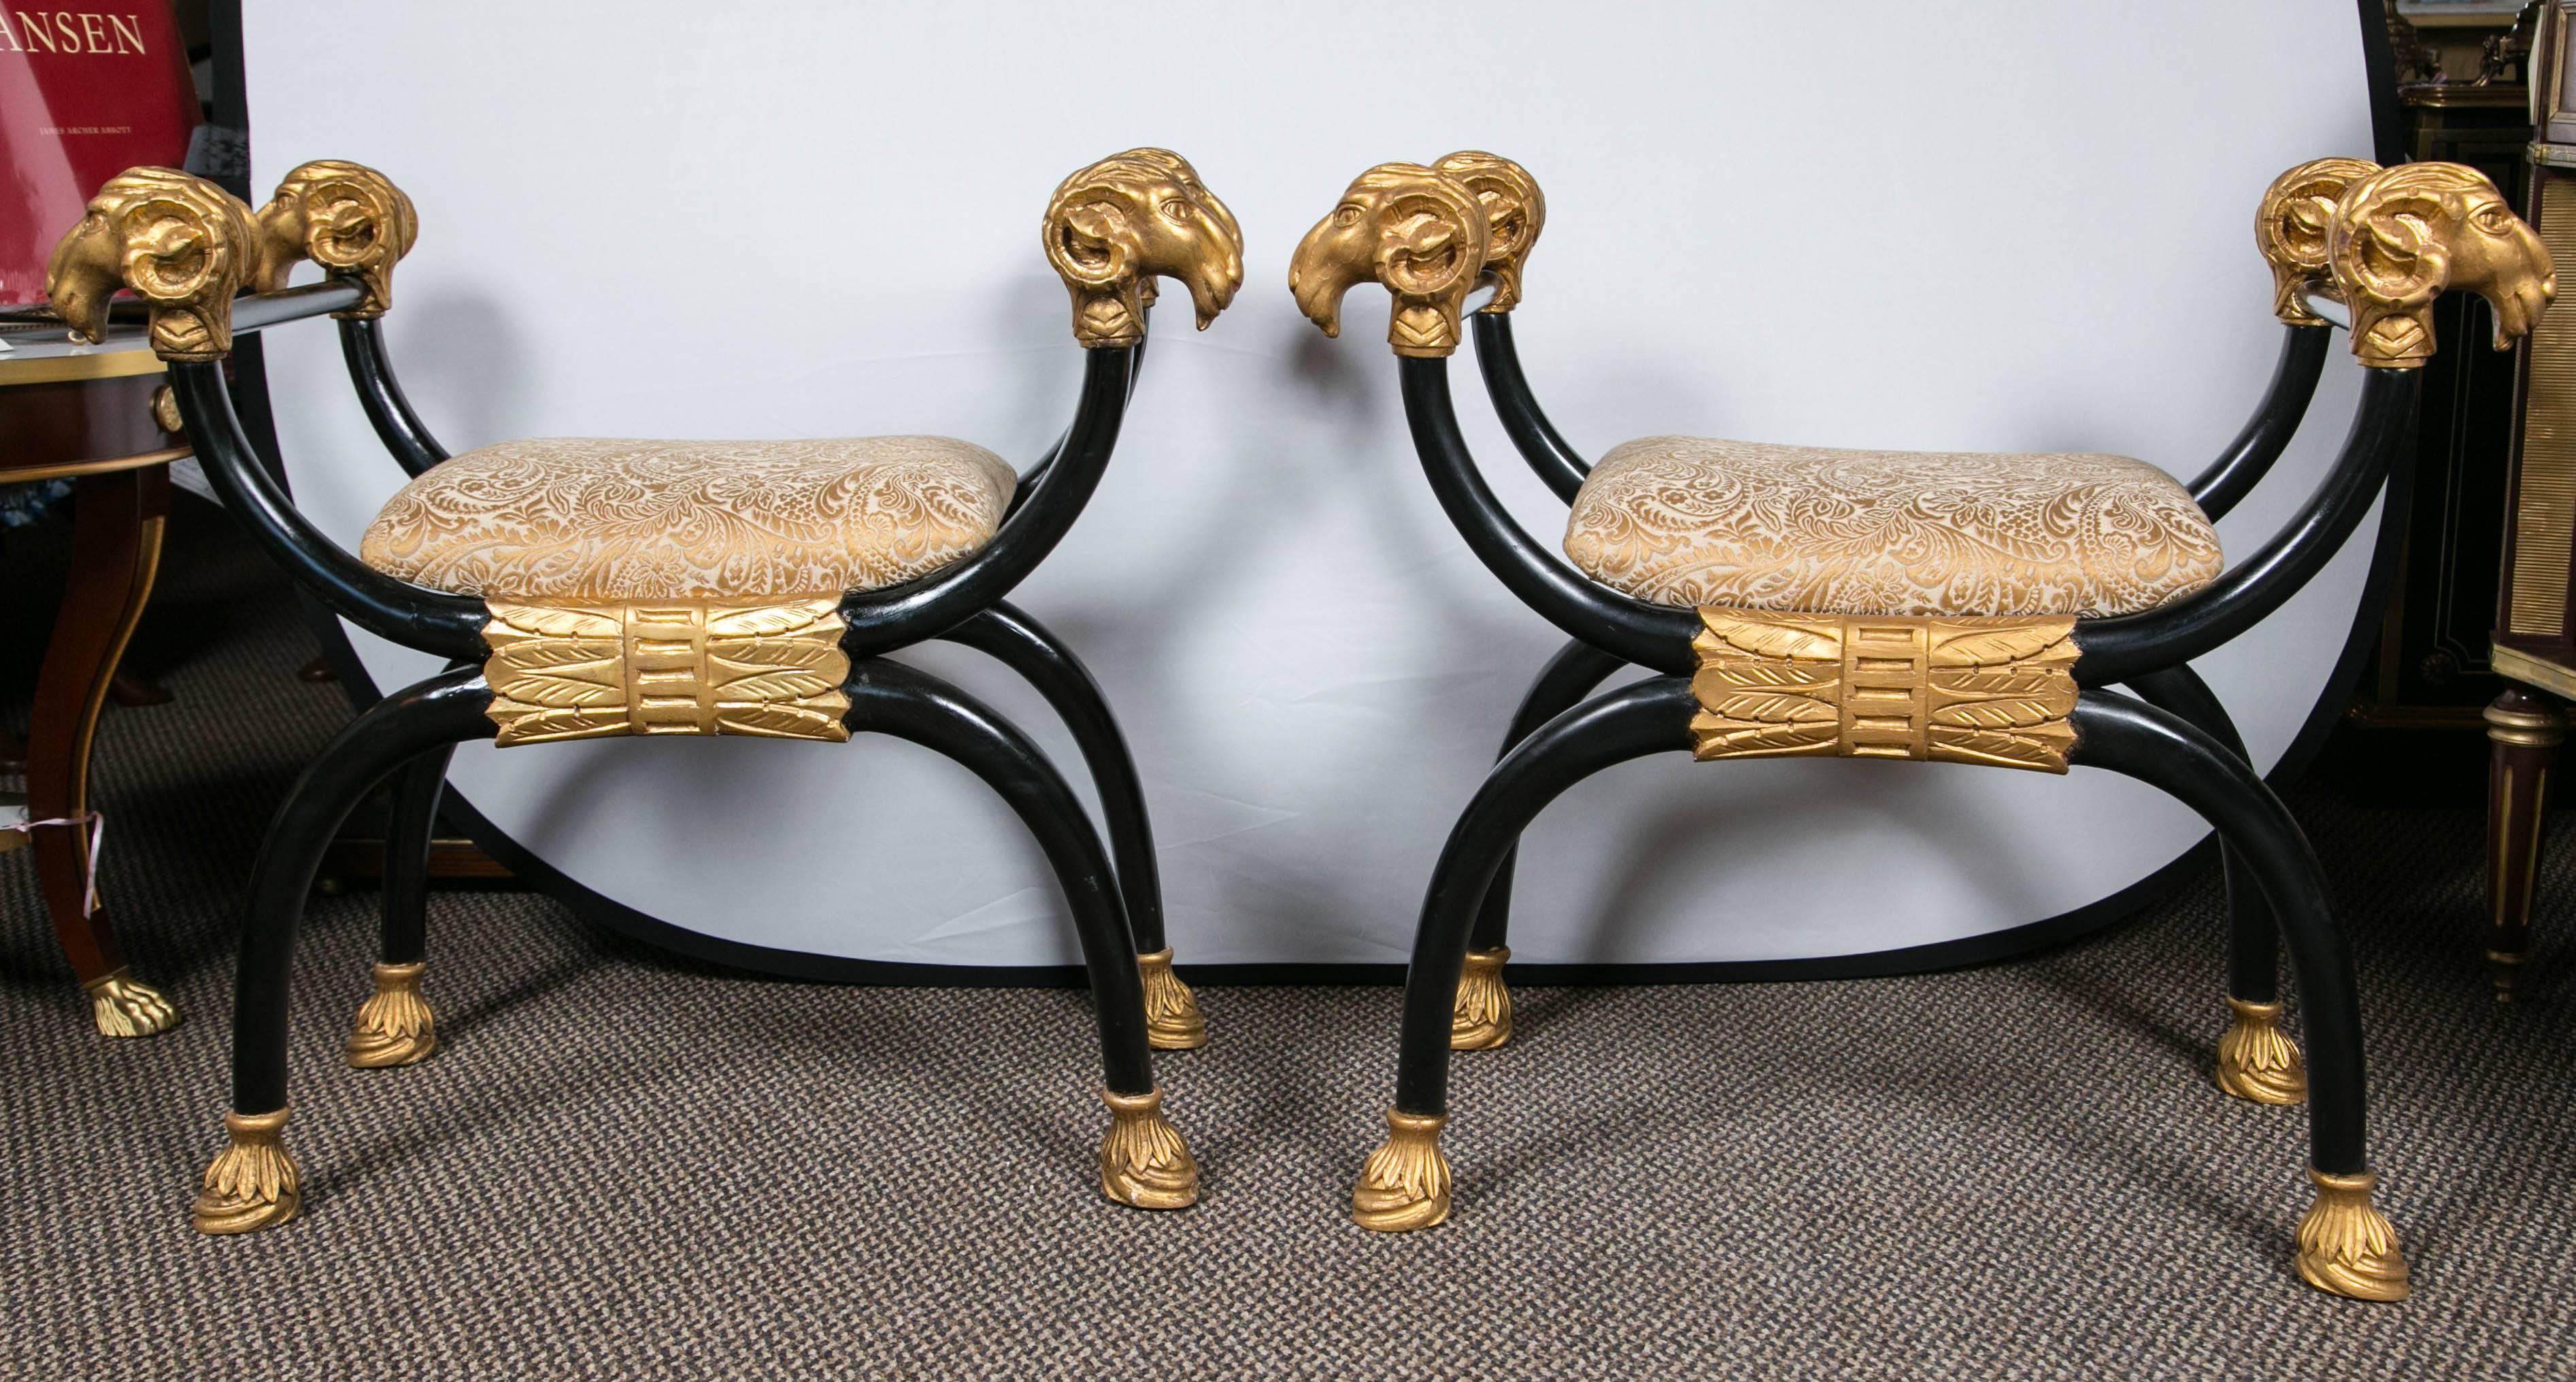 Pair of French Directoire style bench's, gilt gold and ebonized wood form. Decorated with parcel-gilt X-form styled rams' heads and ram's paws. The stunning 